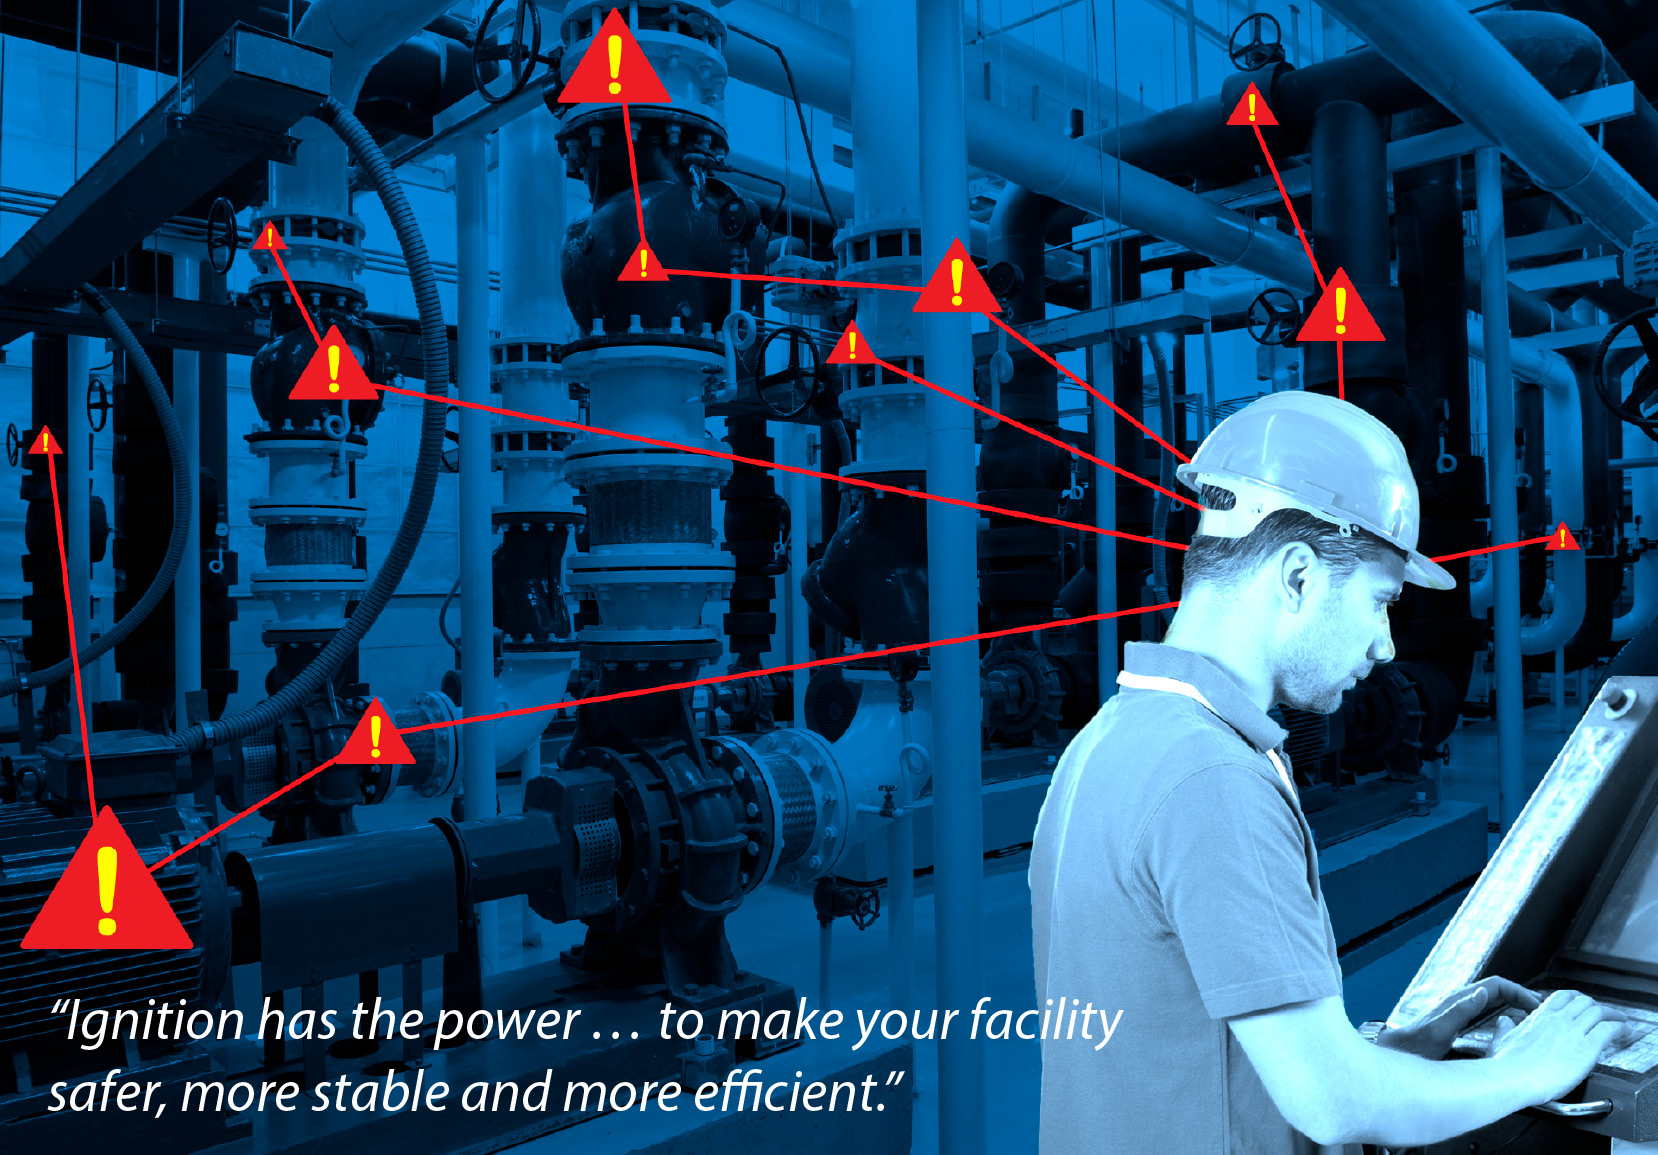 Ignition has the power to make your facility safer, more stable and more efficient.